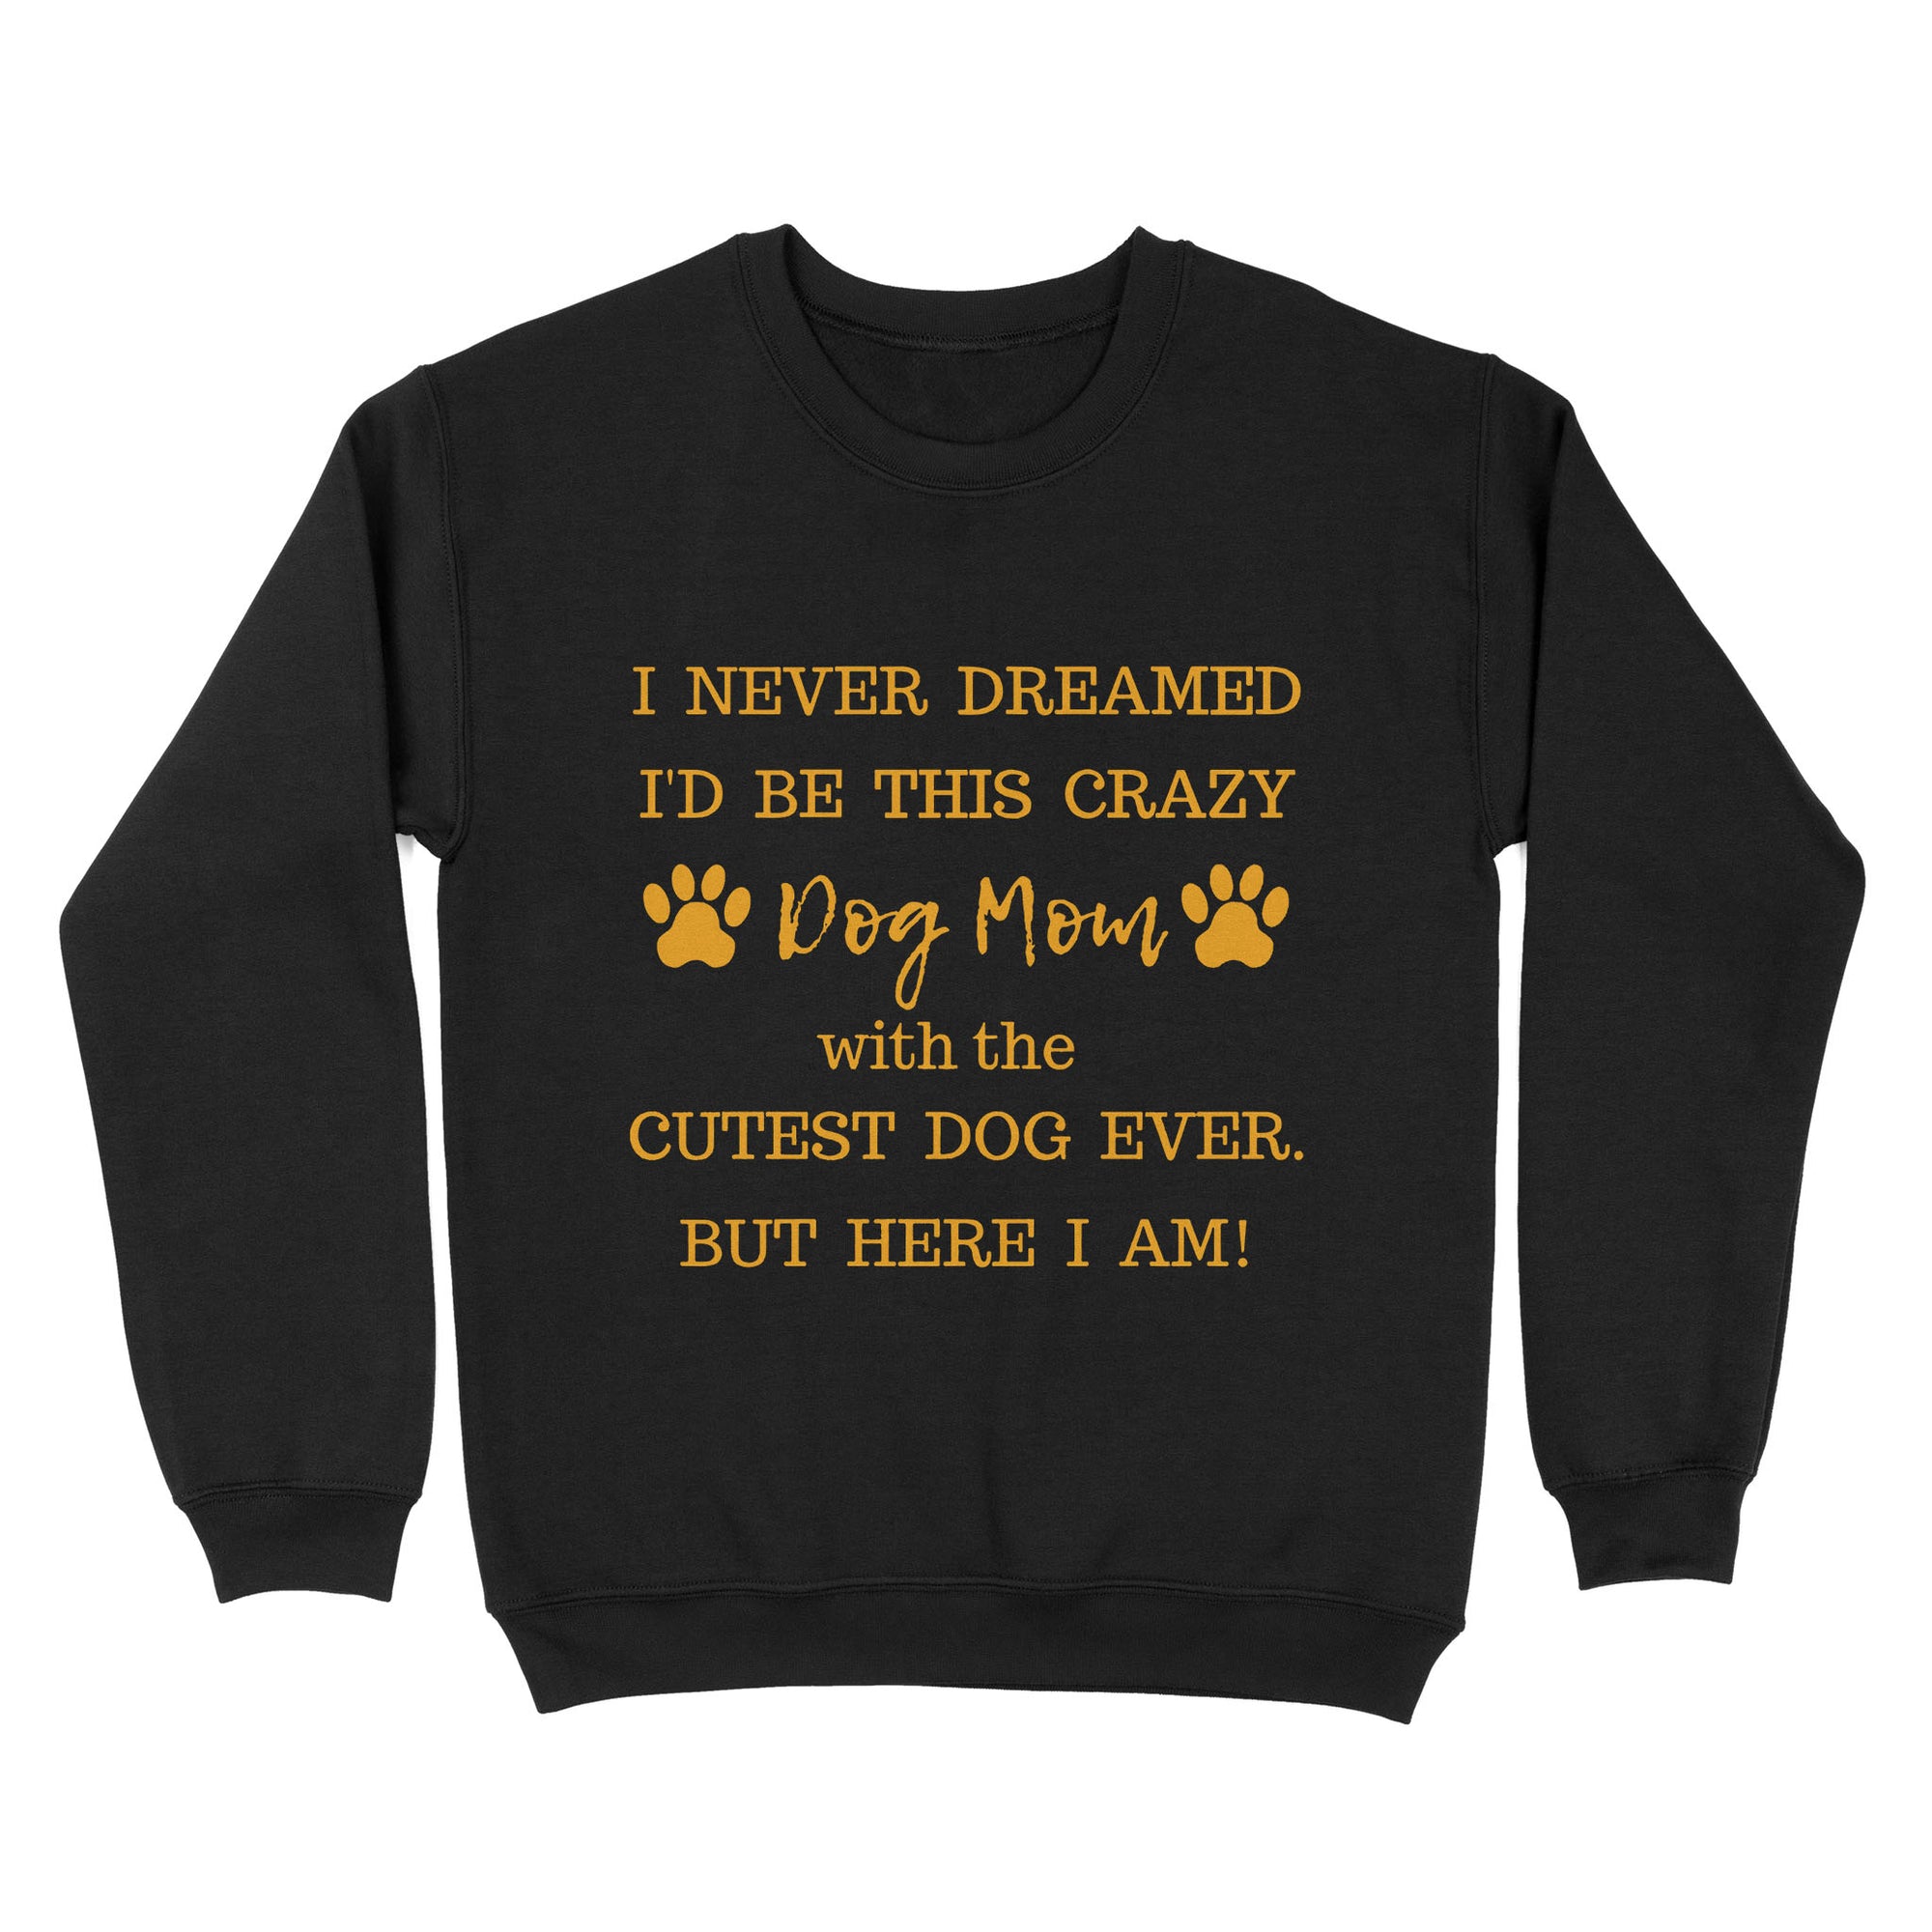 I Never Dreamed I’d Be This Crazy Dog Mom With The Cutest Dogs Ever Standard Crew Neck Sweatshirt